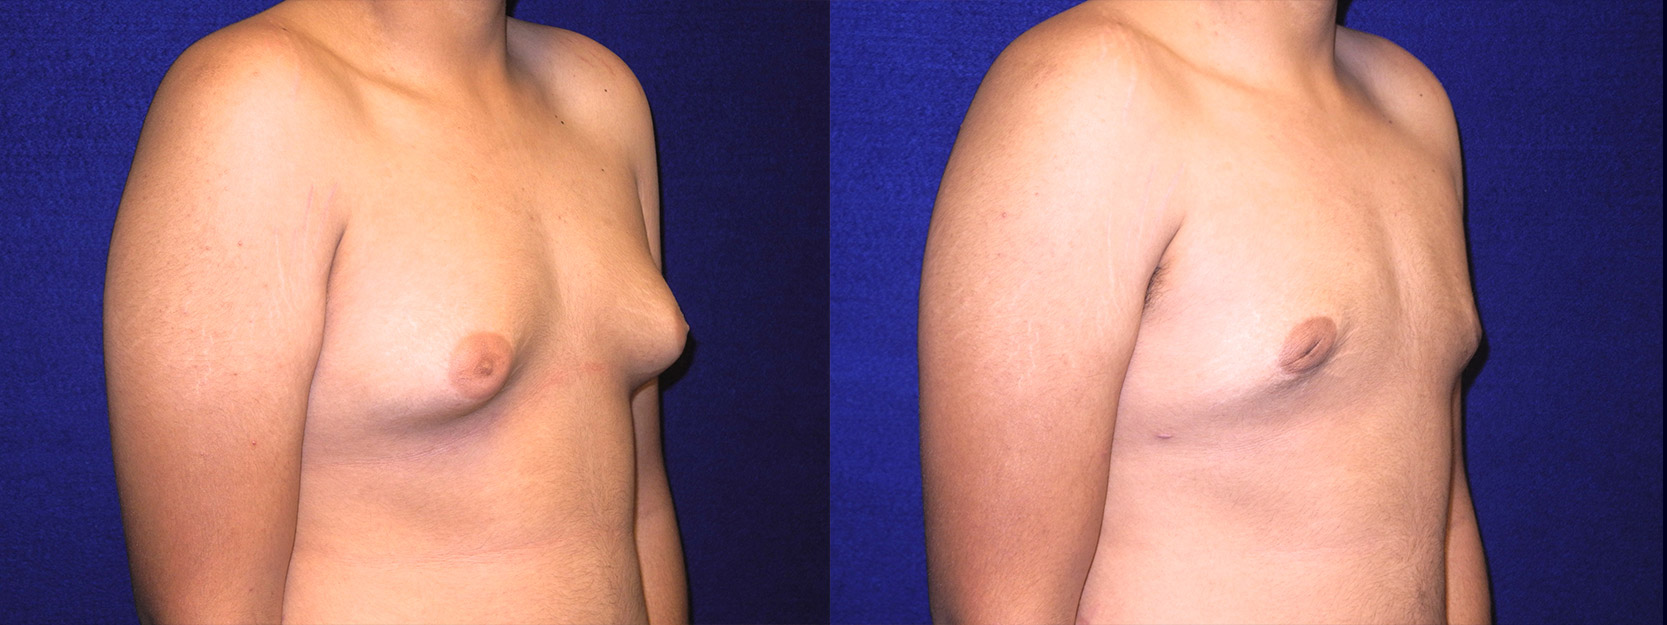 Right 3/4 View - Male Breast Reduction